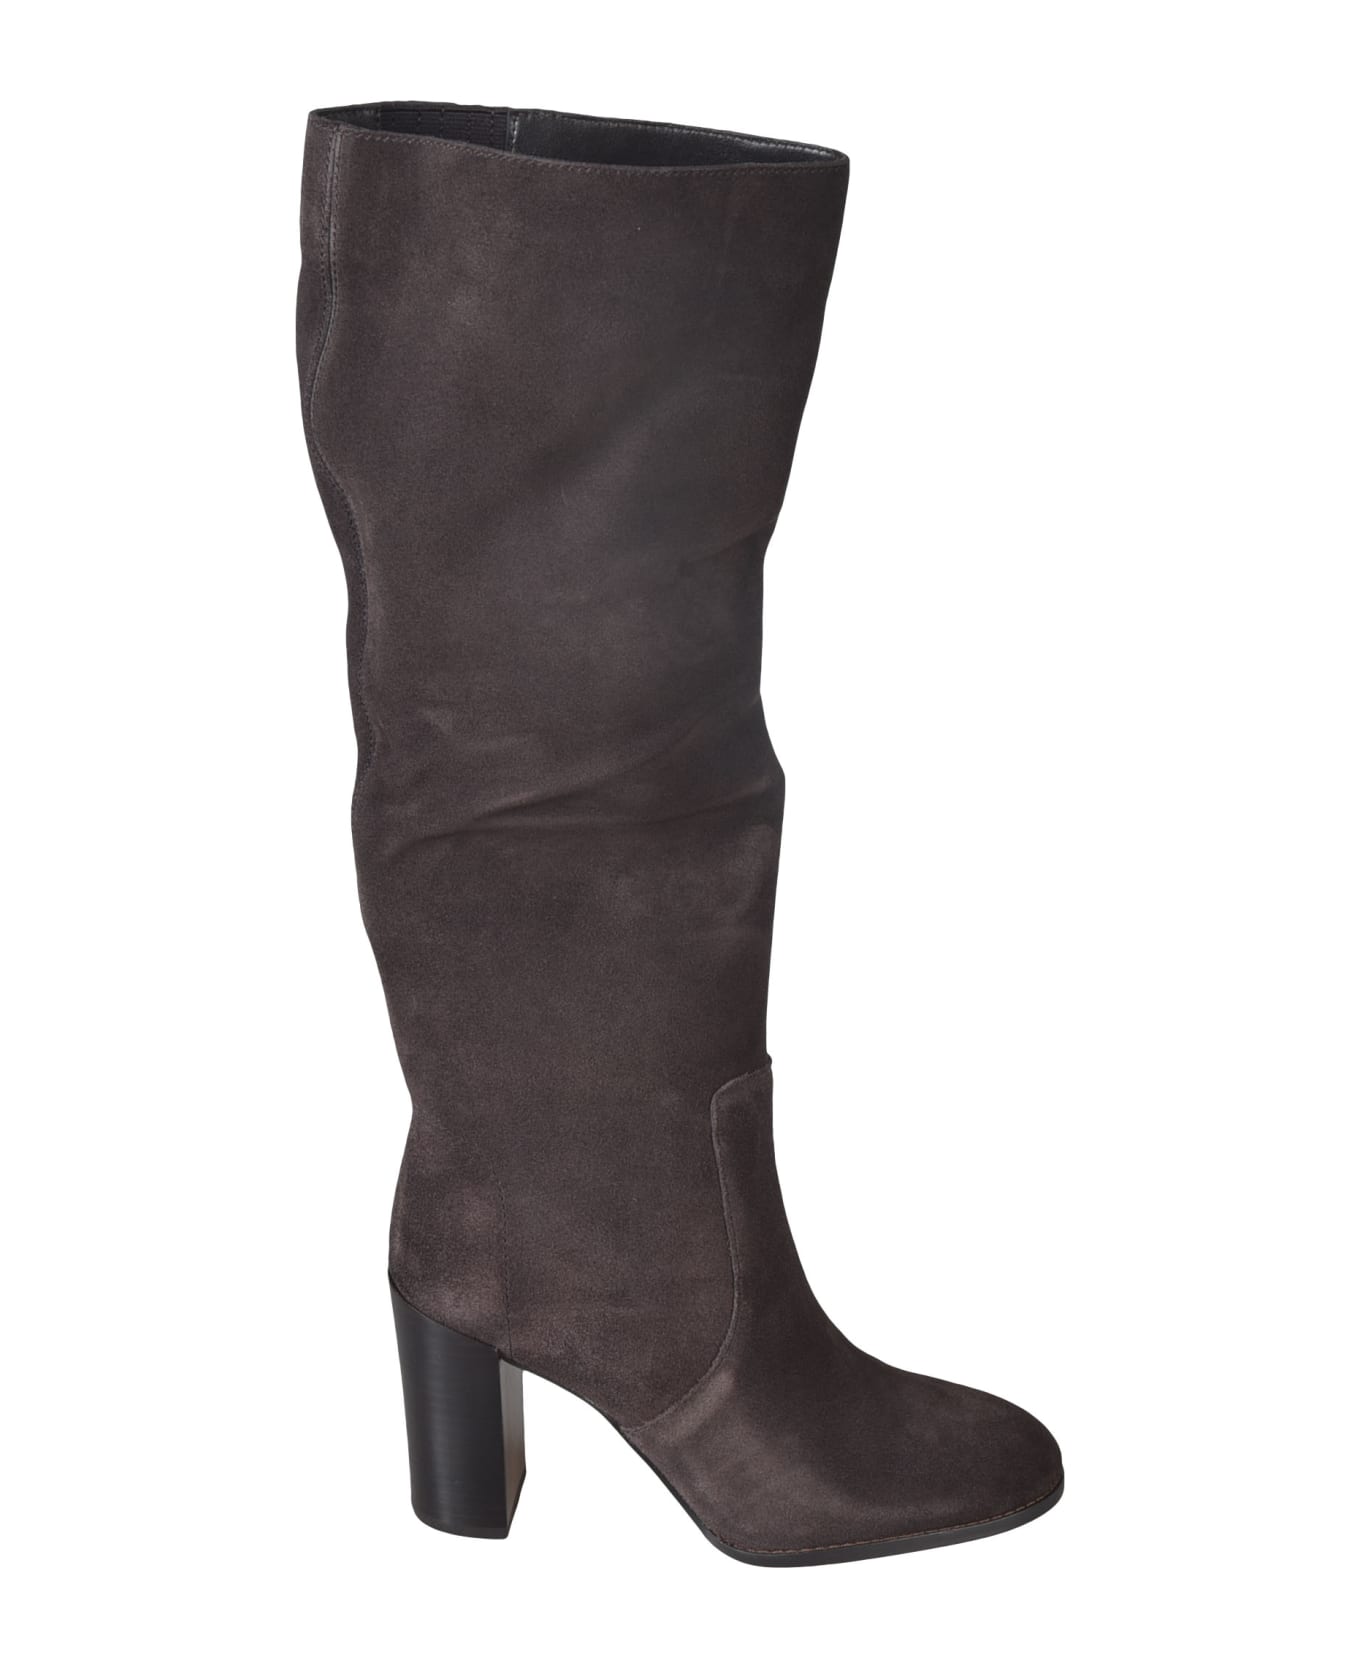 Michael Kors Luella Suede Knee High Boots - Chocolate ブーツ